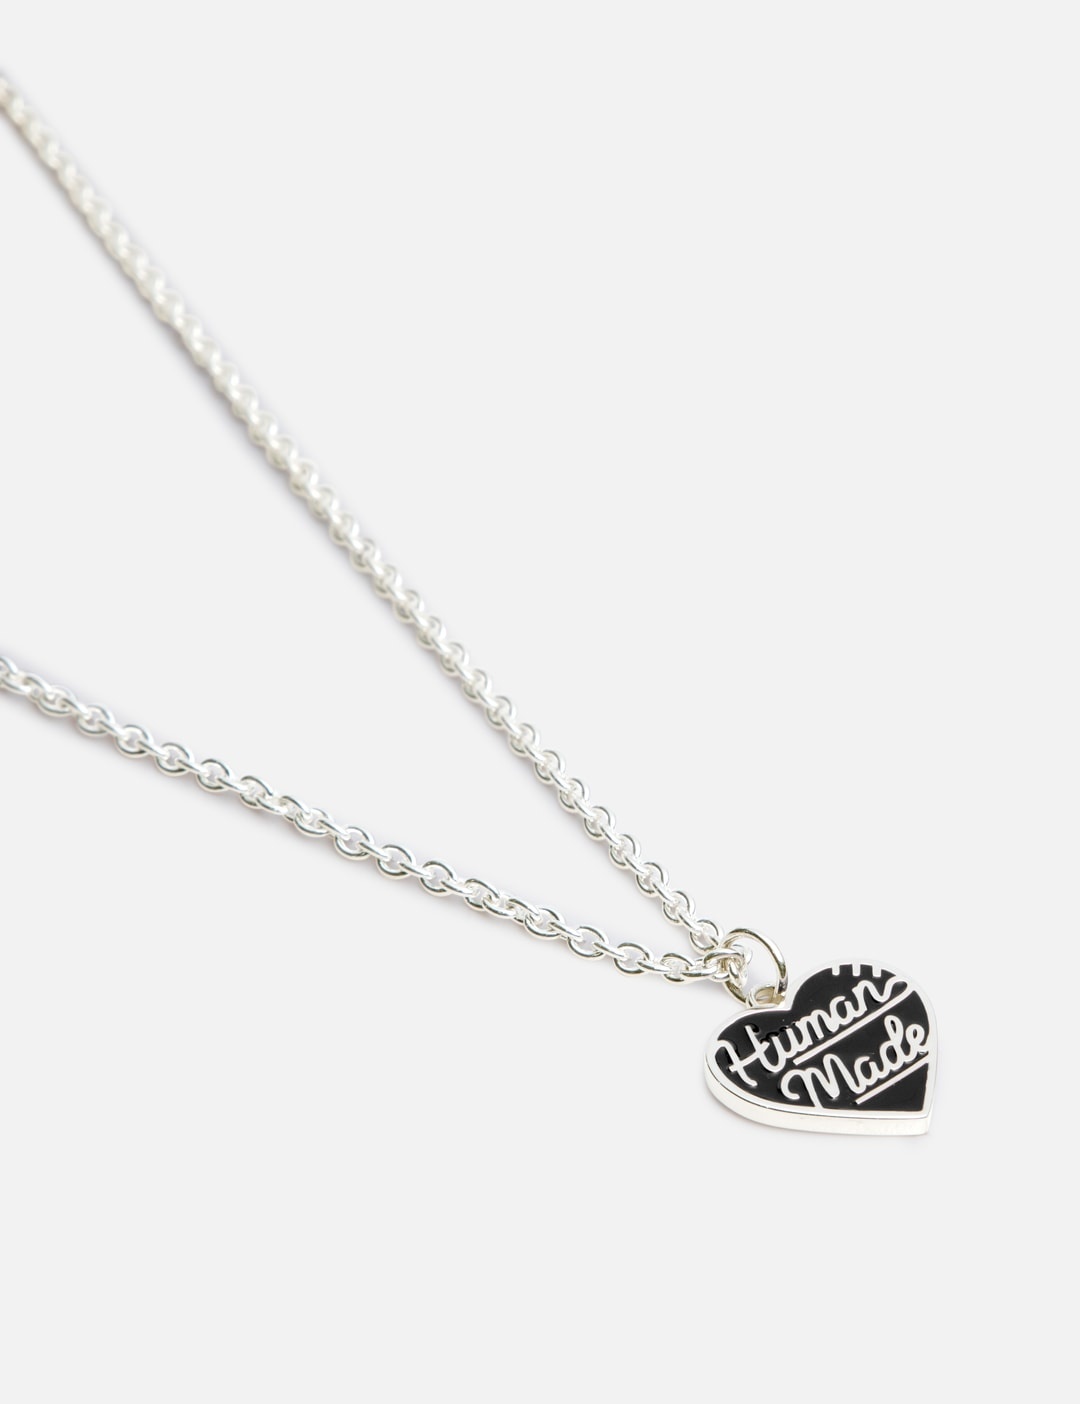 HEART SILVER NECKLACE - 2